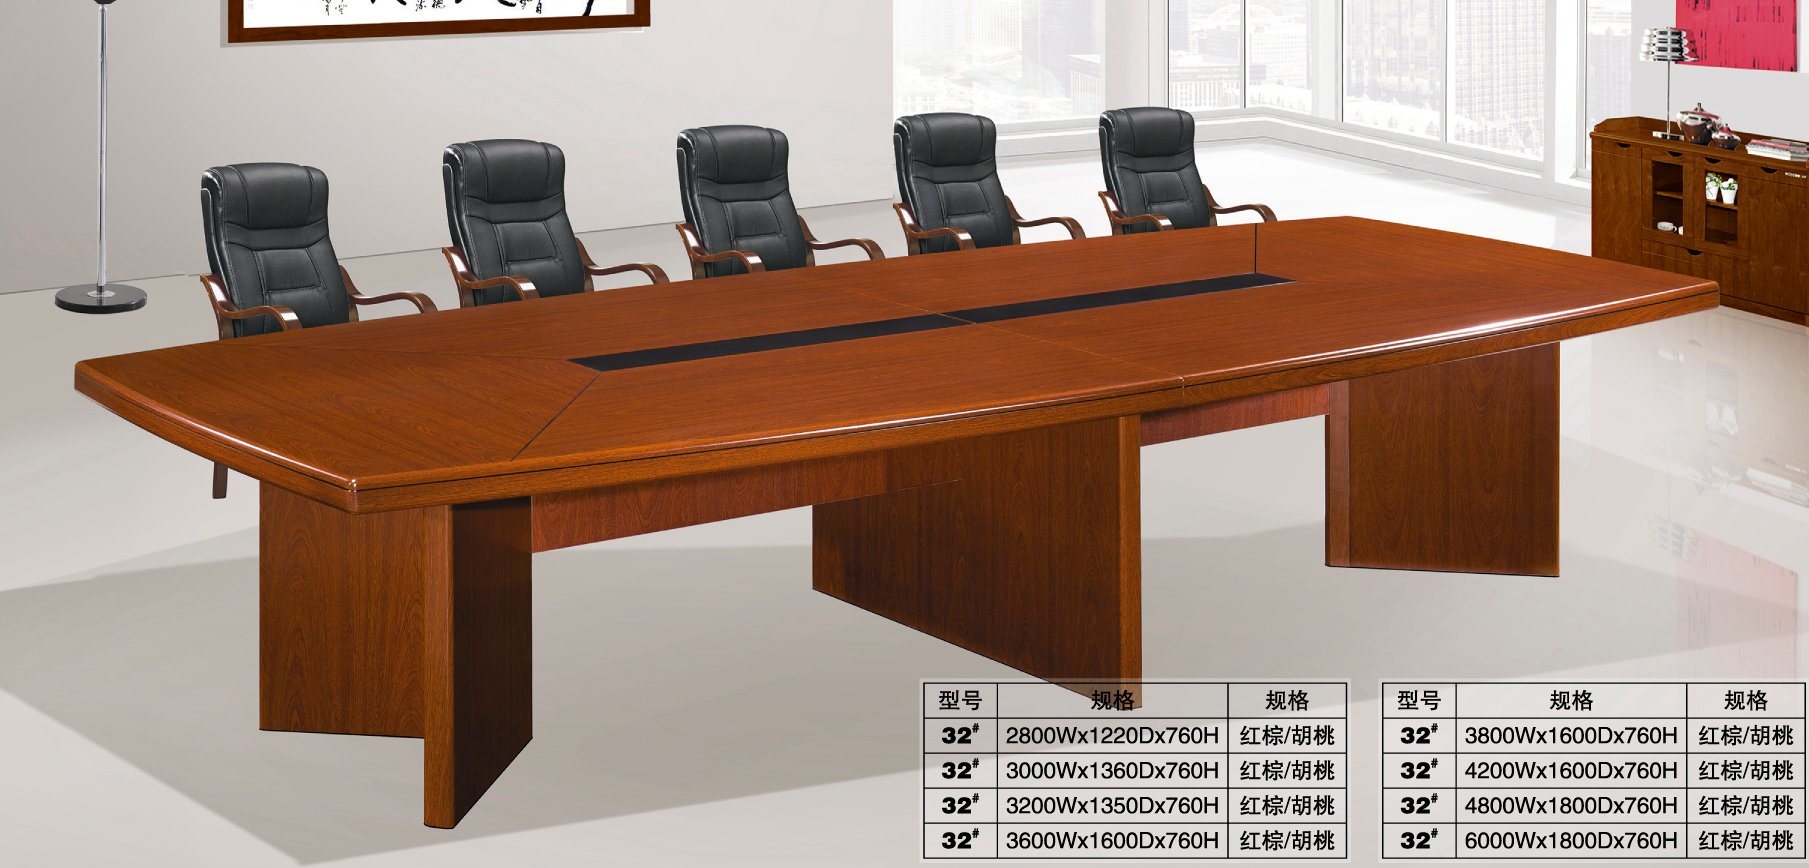 Nice Design Table Conference Table (FEC32)